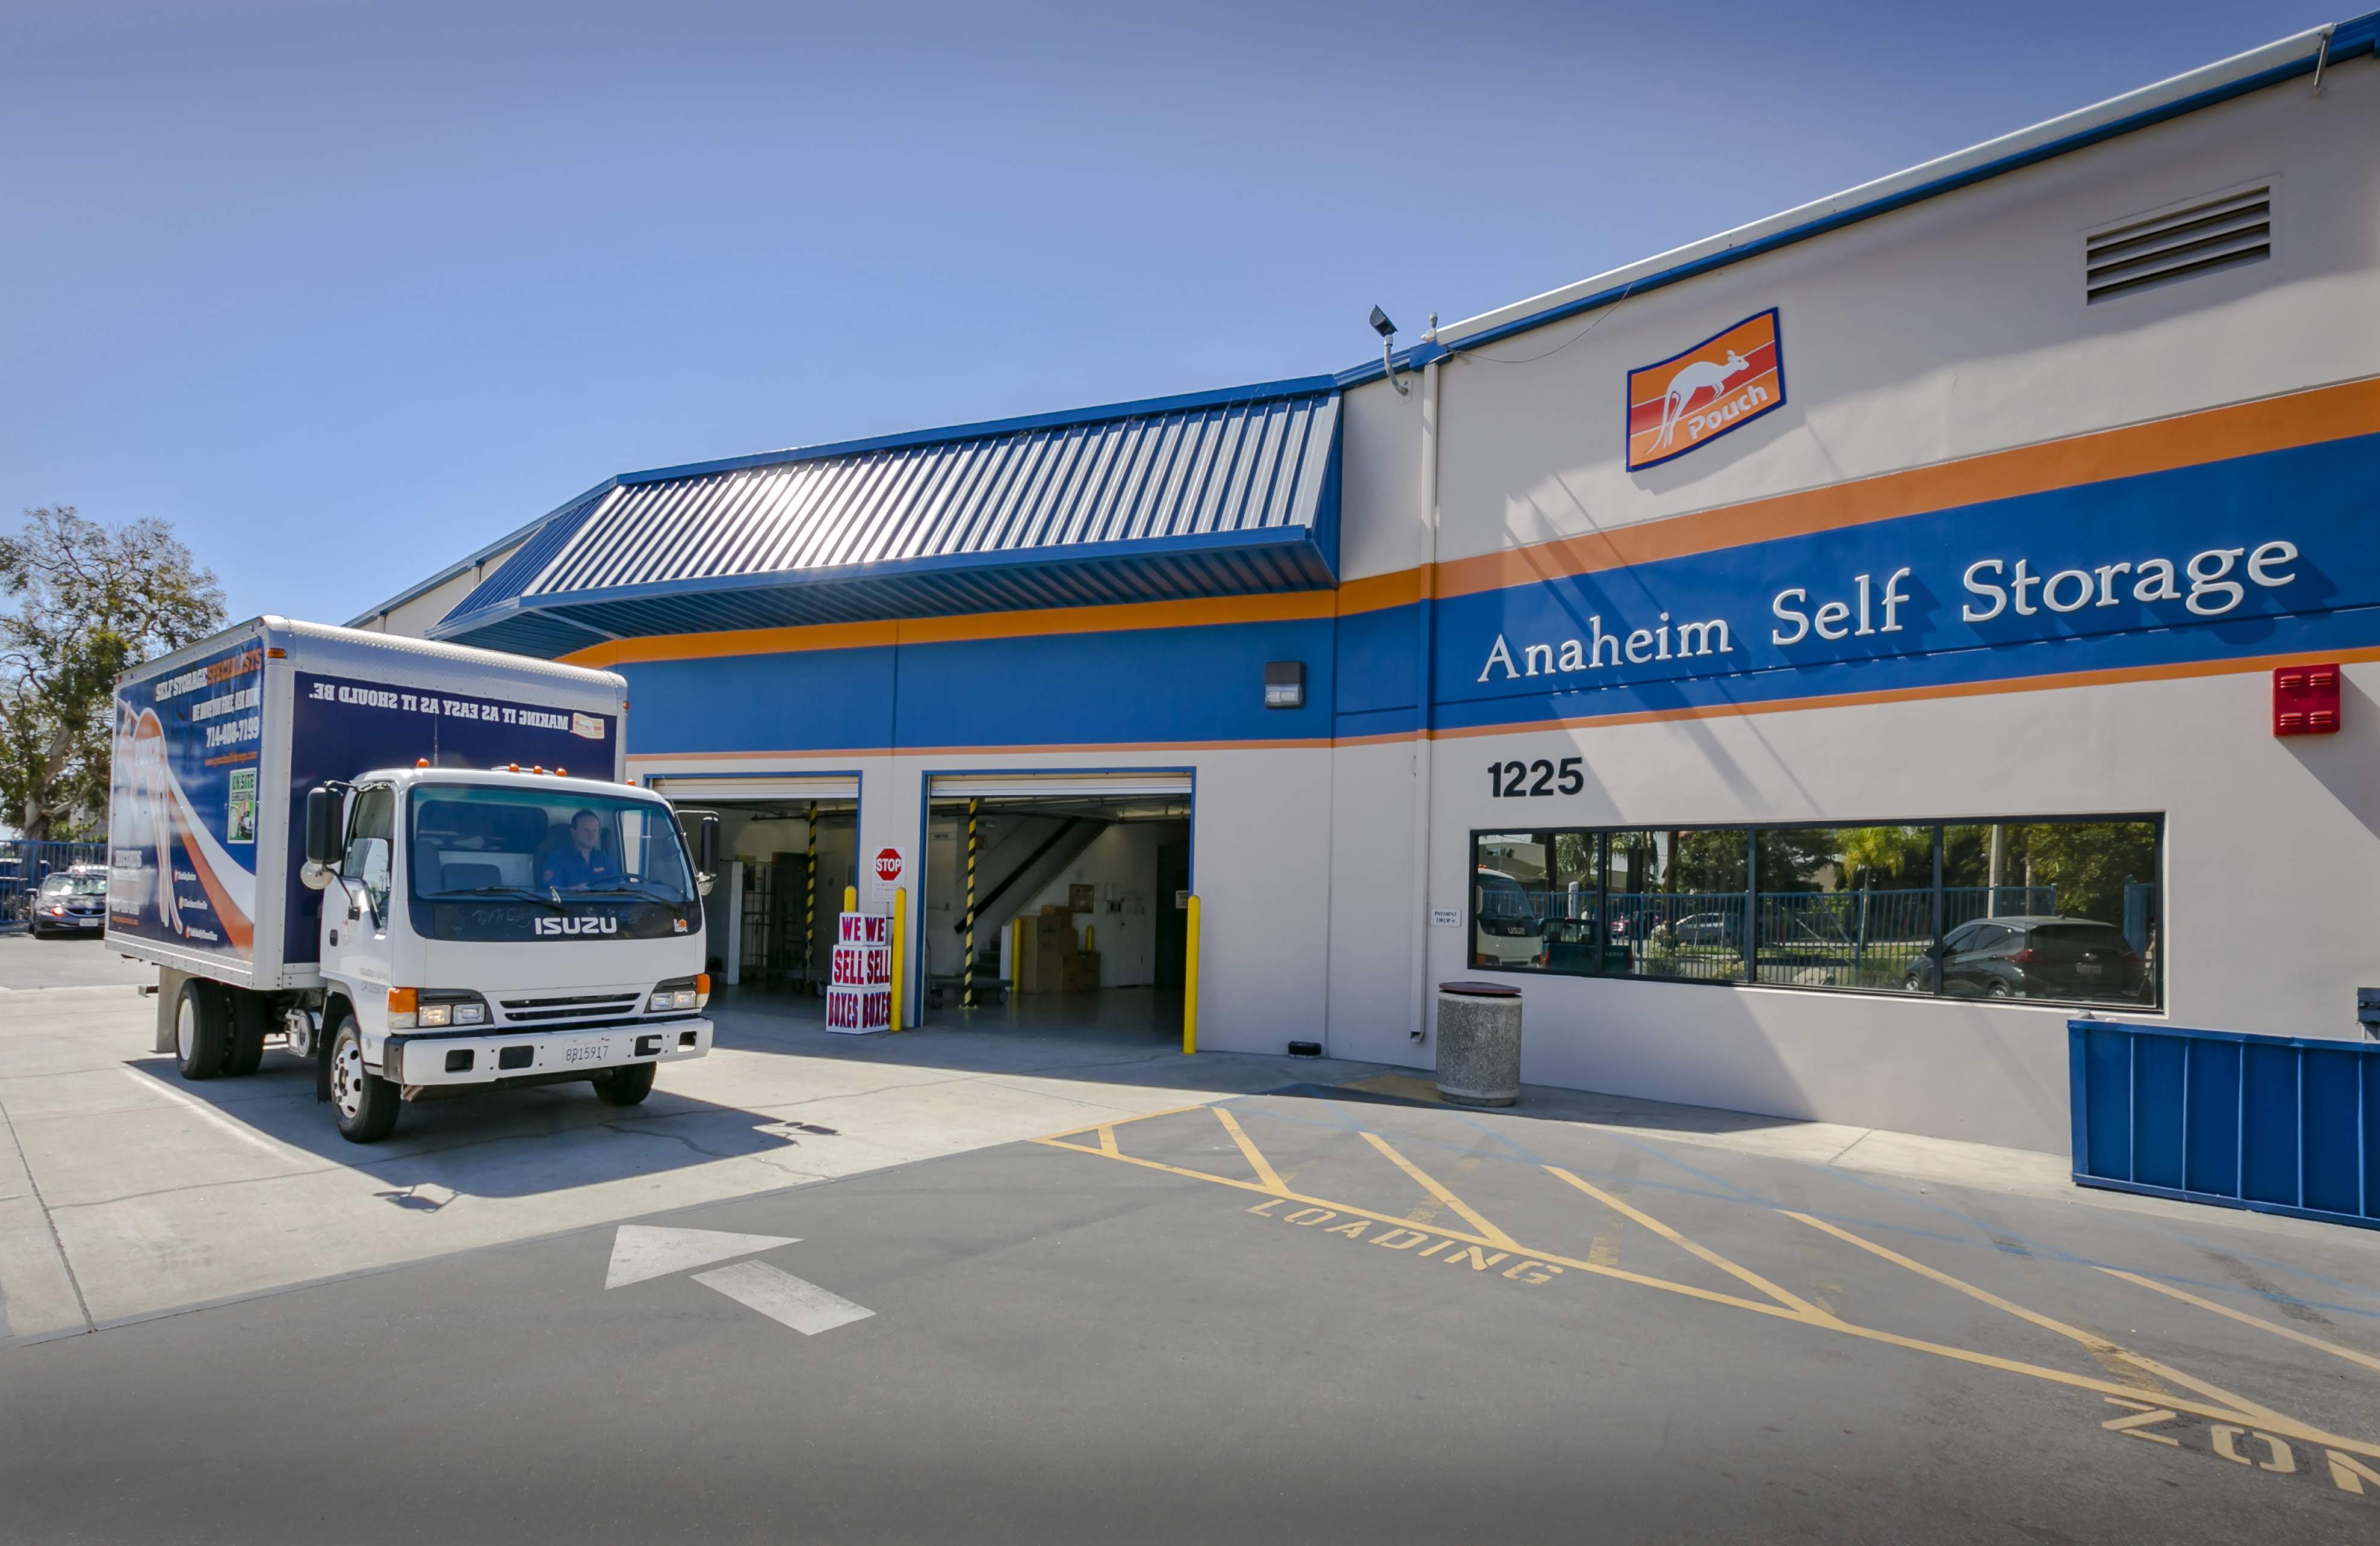 Exterior of Anaheim Self Storage, moving truck parked in front of building